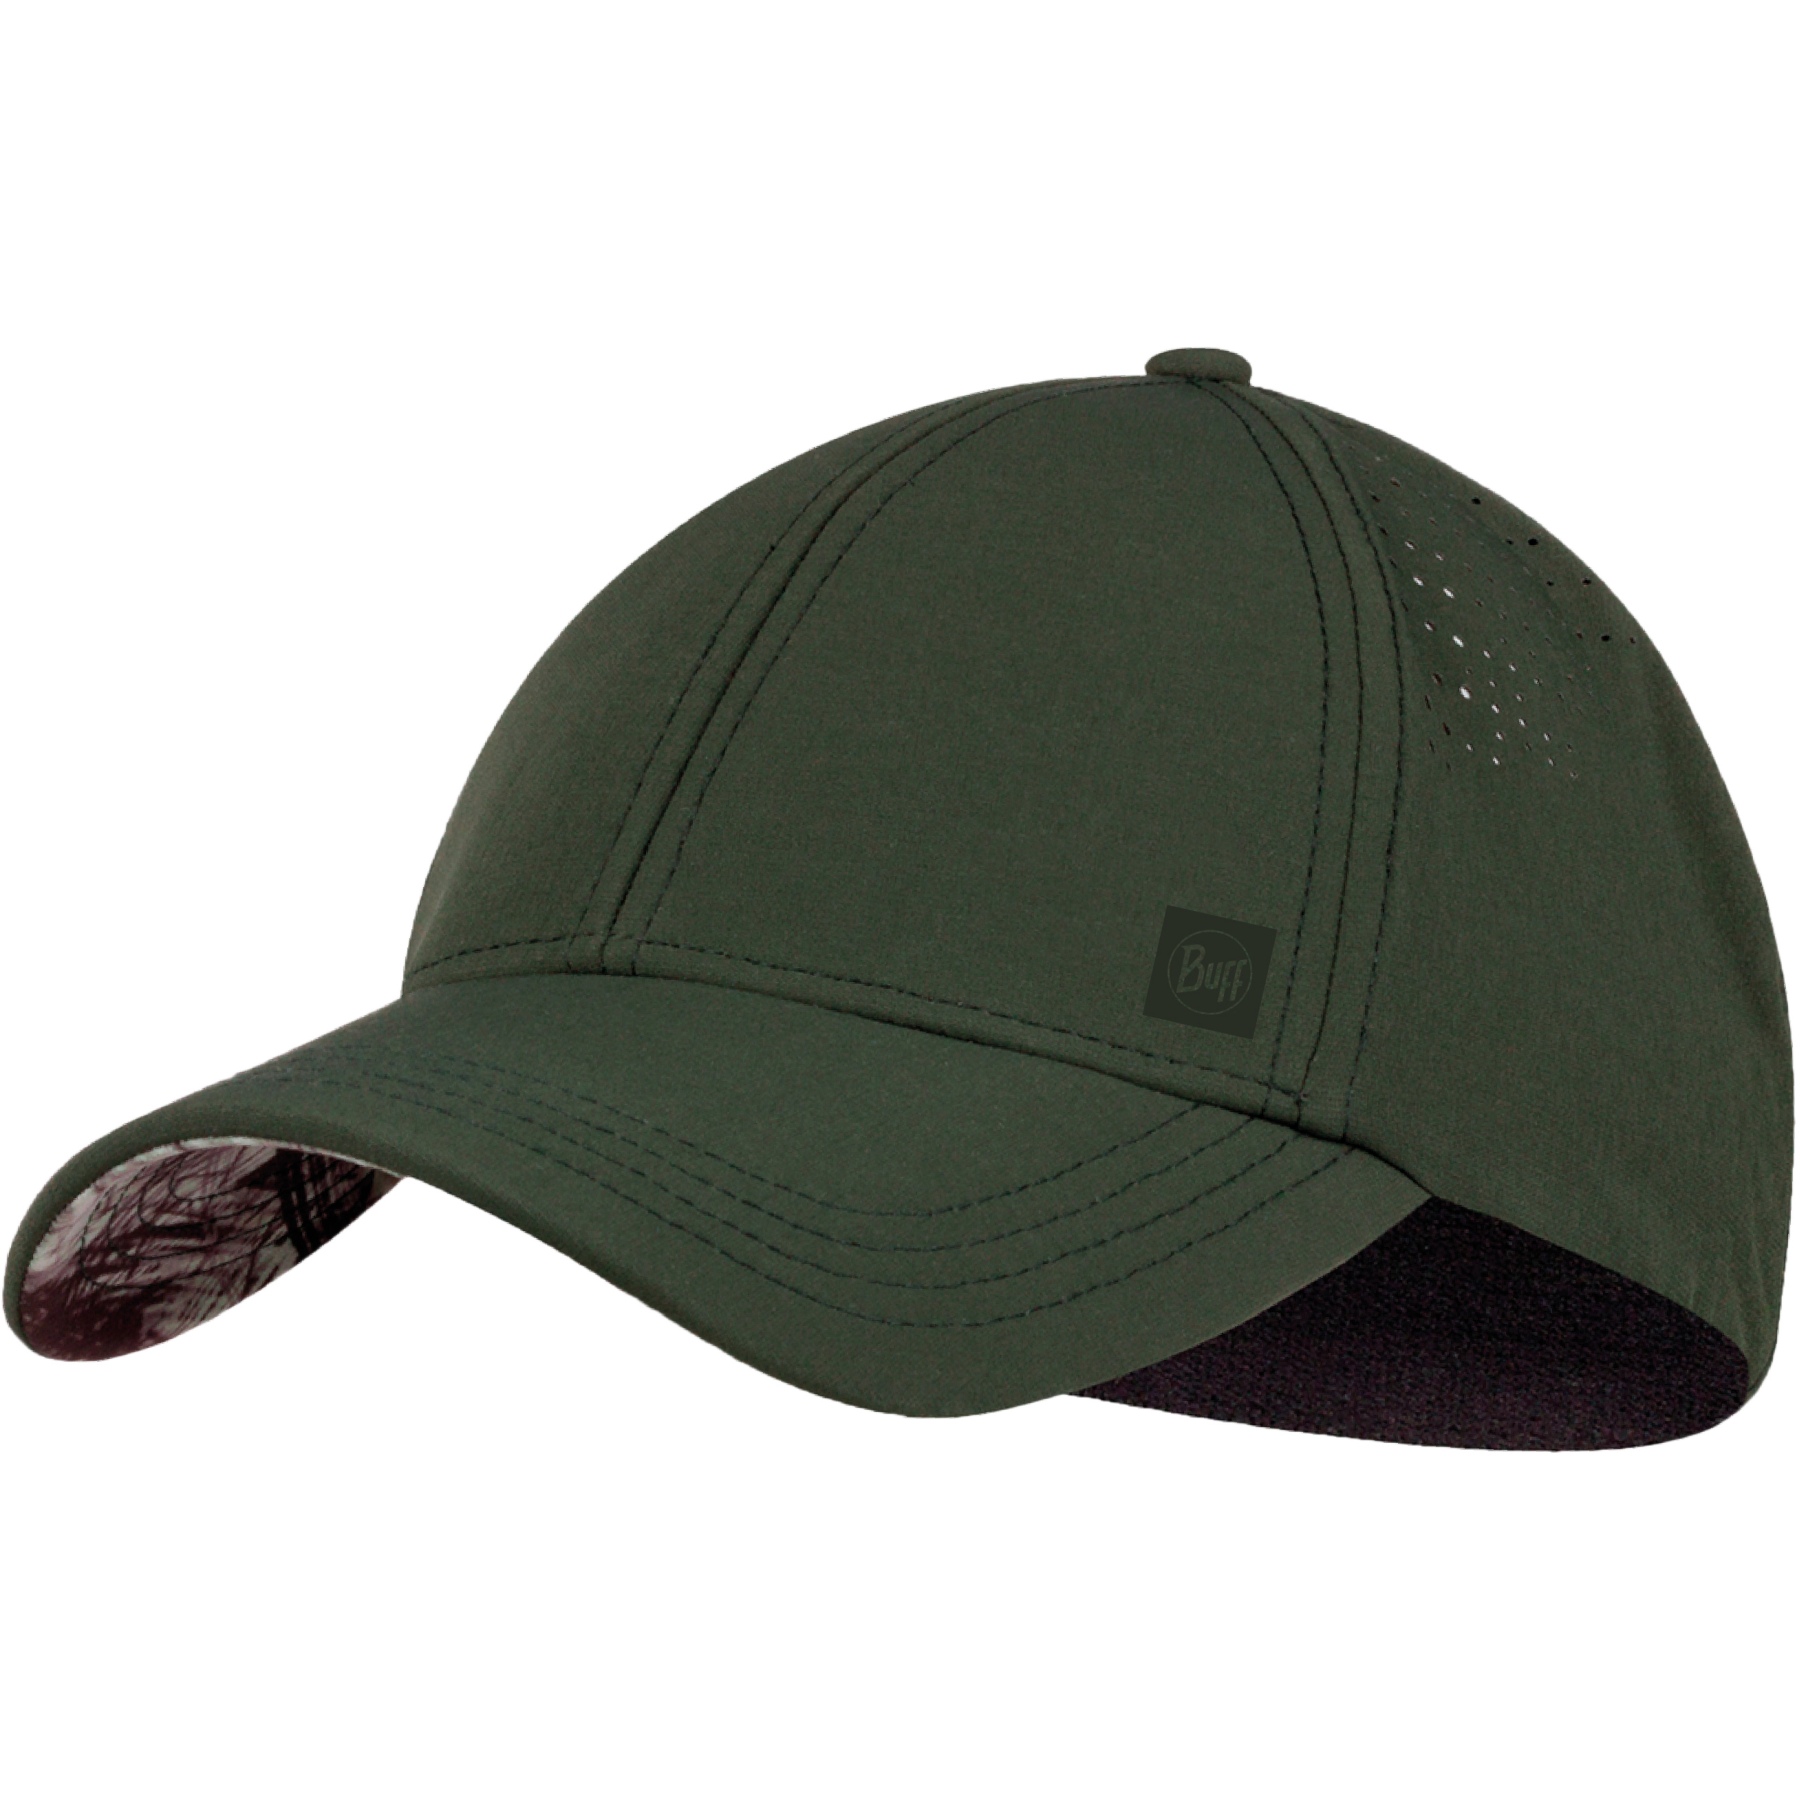 Picture of Buff® Summit Cap Unisex - Hashtag Moss Green